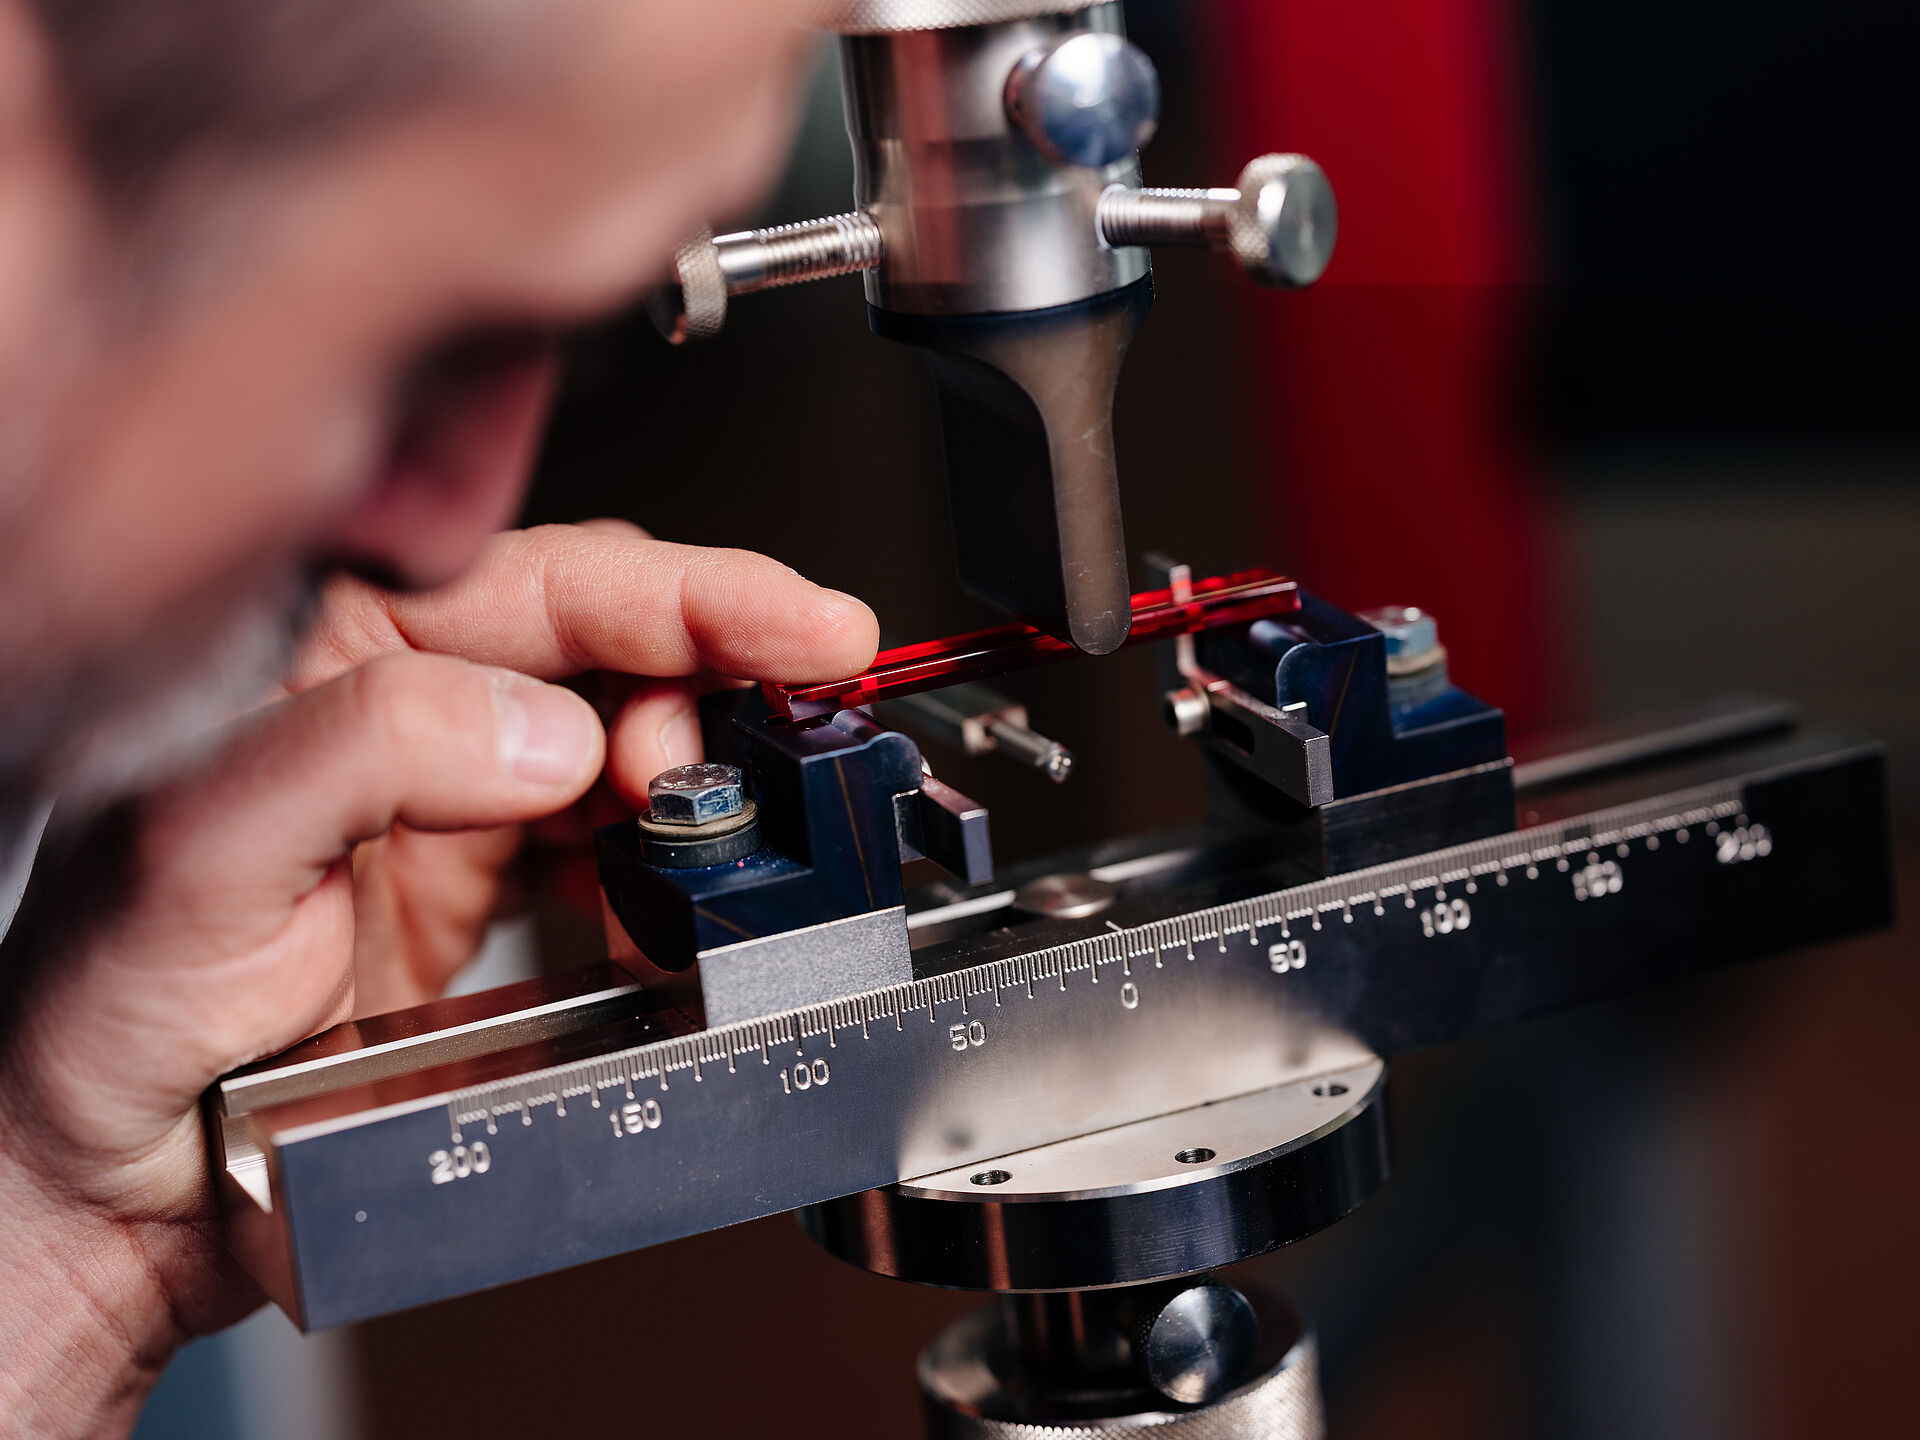 A scientist prepares to measure the deflection strength of a red colored transparent plastic strip in an apparatus